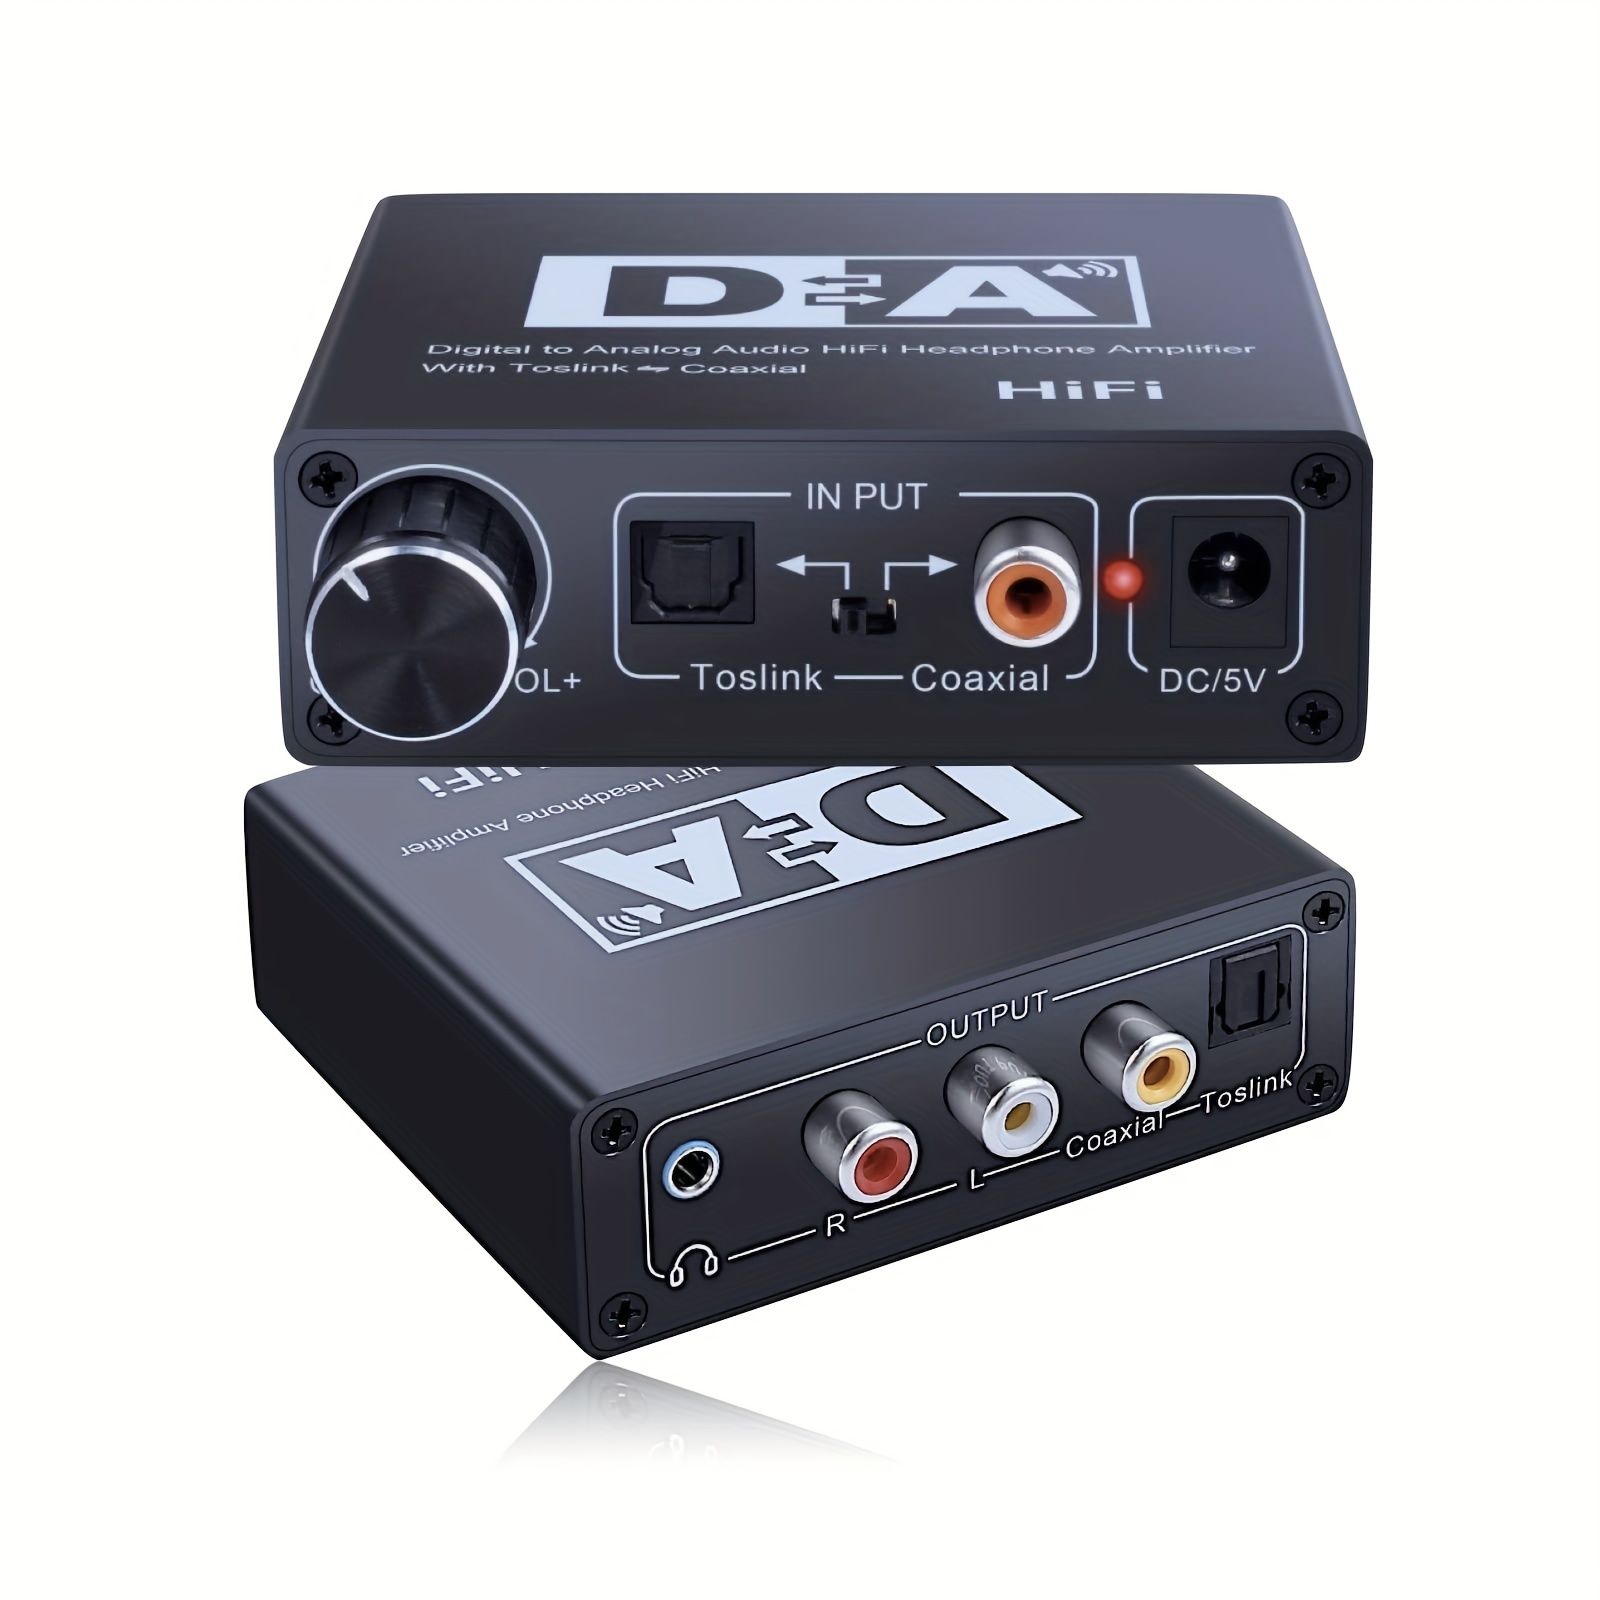 Optical to Auxiliary - Optical to AUX 3.5 Cable Converter - optical digital  audio converter to aux 